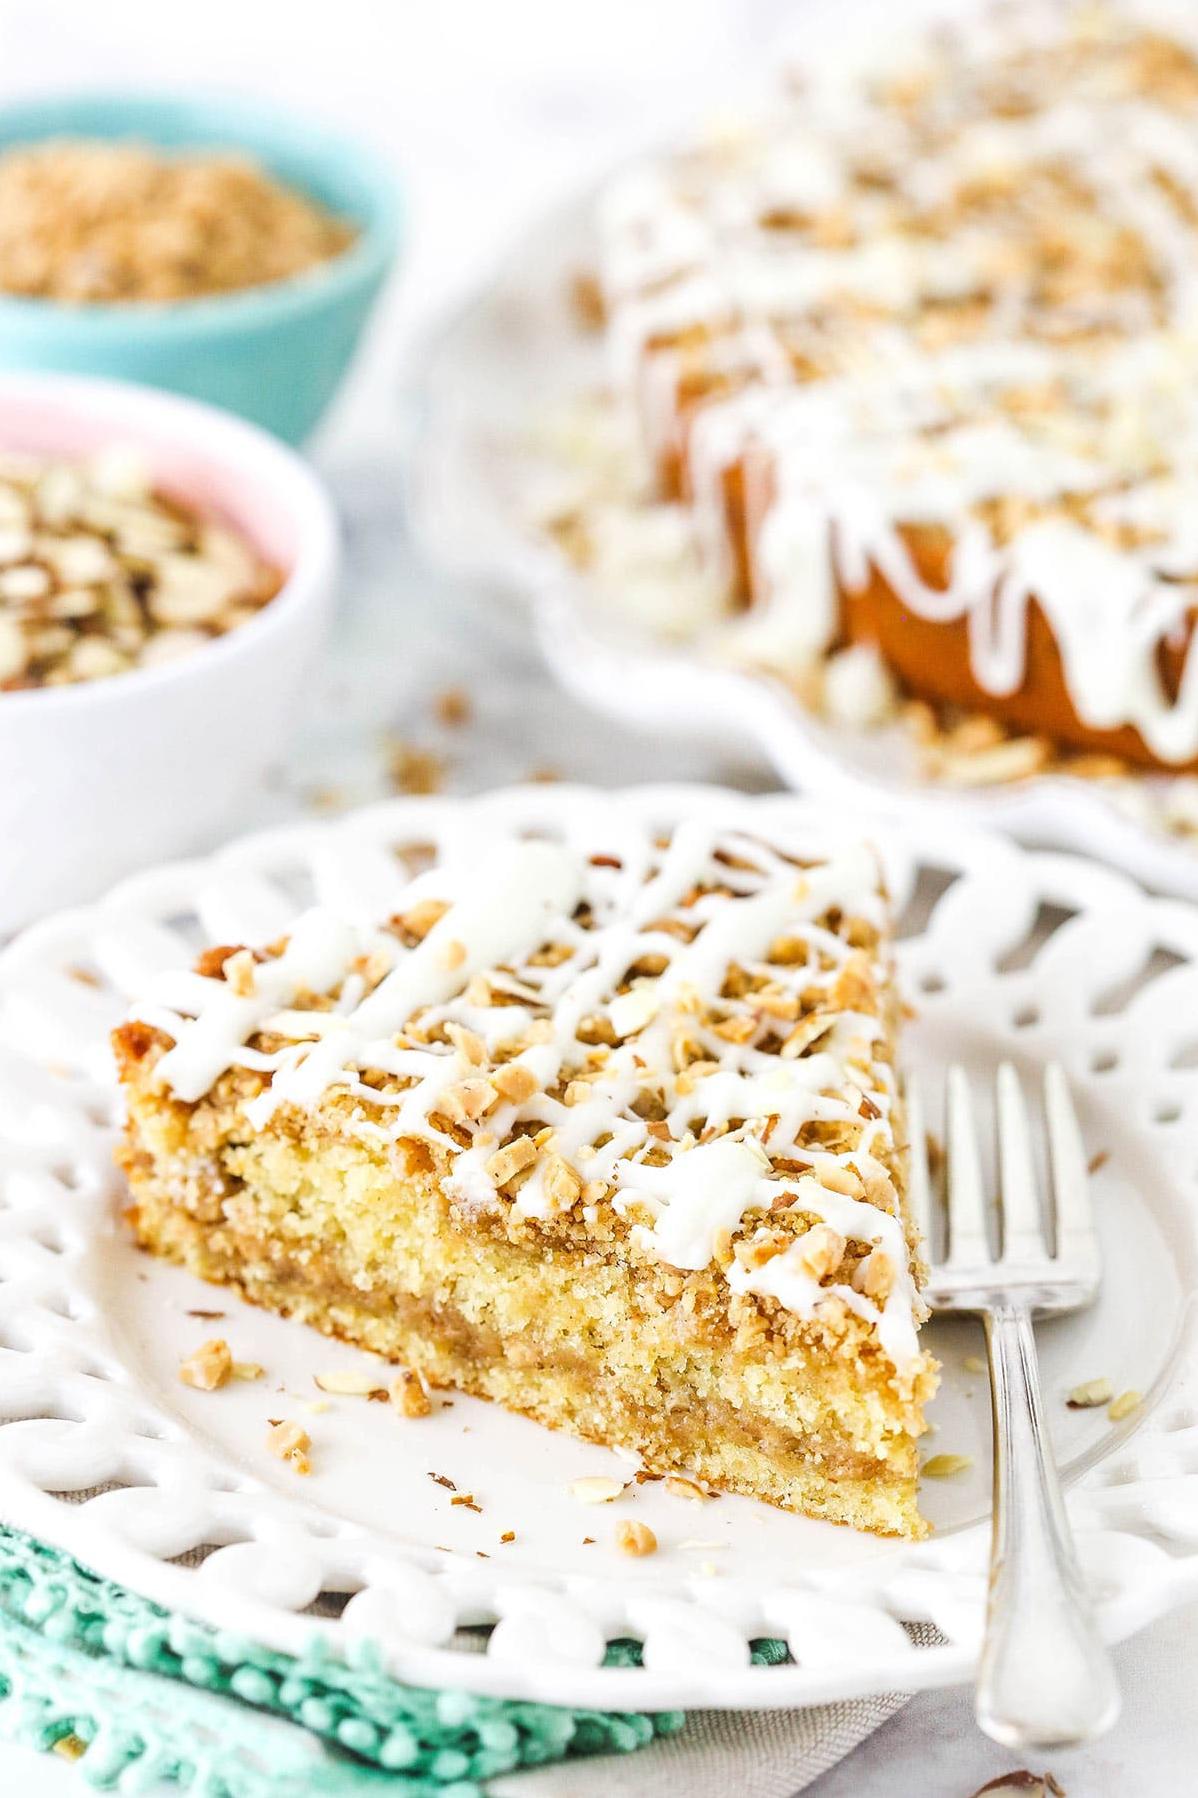  Don't settle for a plain coffee cake when you can have this elevated almond-coffee version.